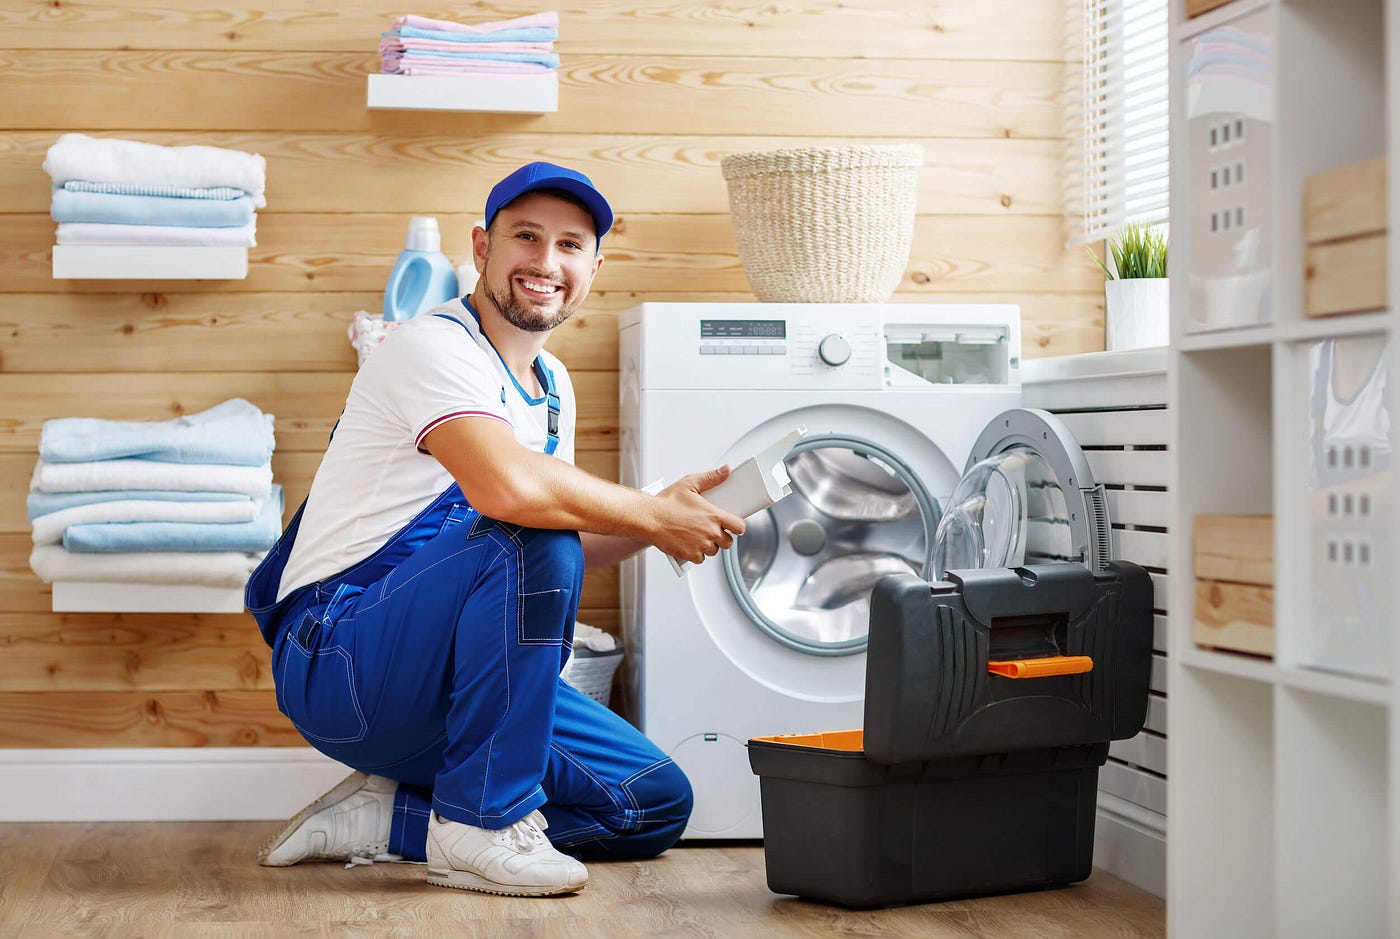 Deciphering Appliance Dilemmas A Thorough Handbook for Consumers in Selecting the Perfect Repair Service